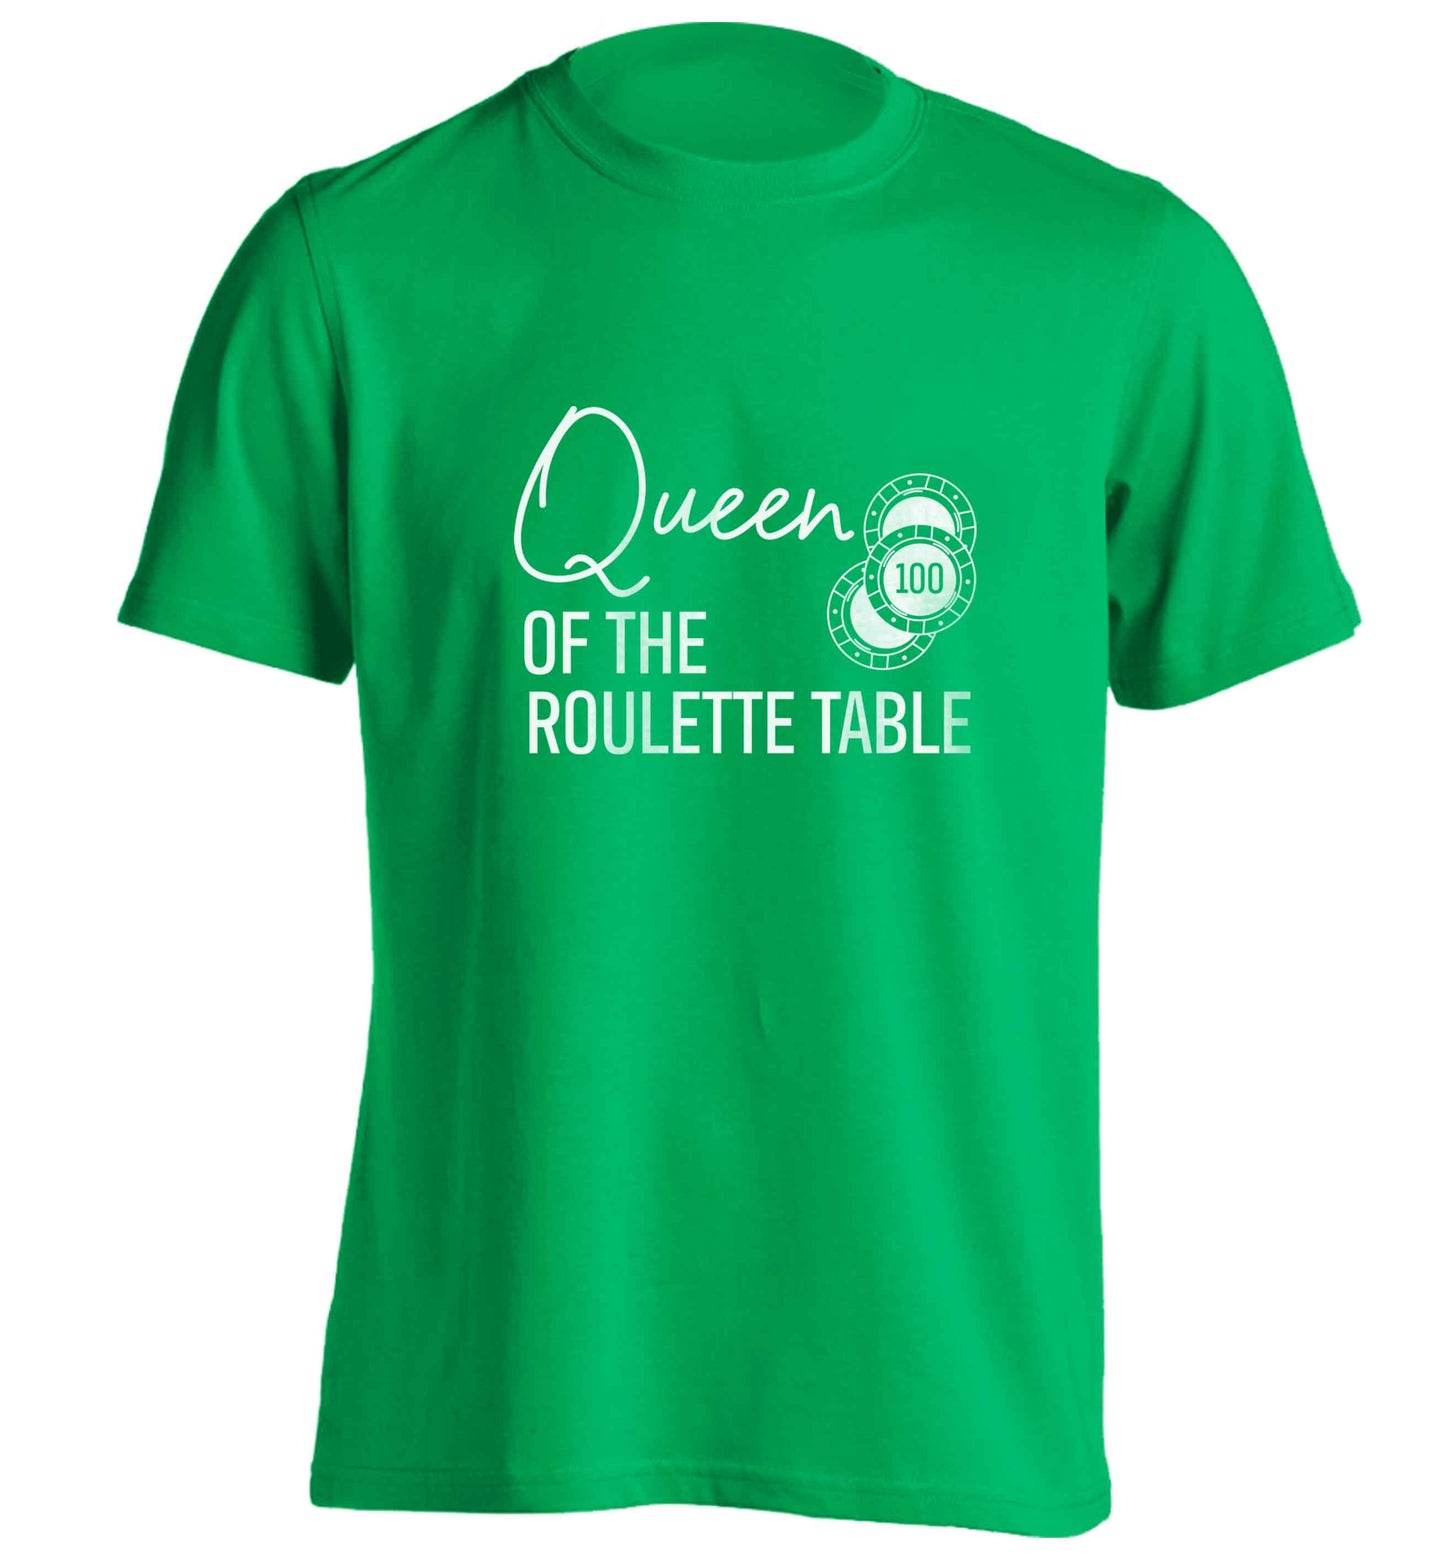 Queen of the roulette table adults unisex green Tshirt 2XL